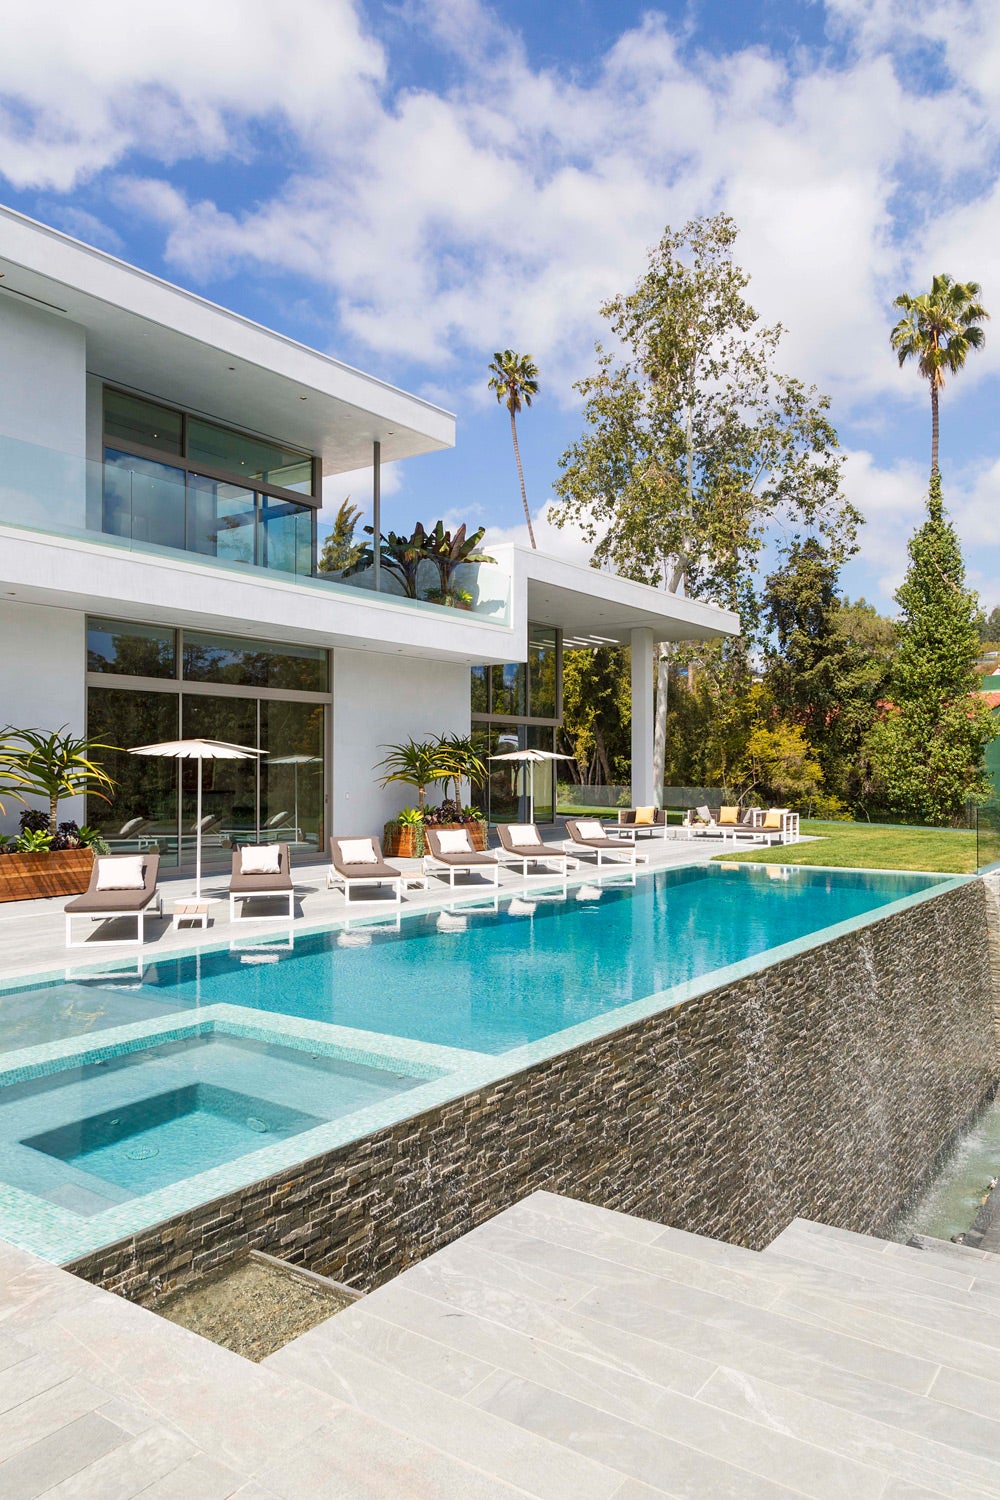 Crib Envy: Inside Beyonce and Jay Z's New Los Angeles Home
